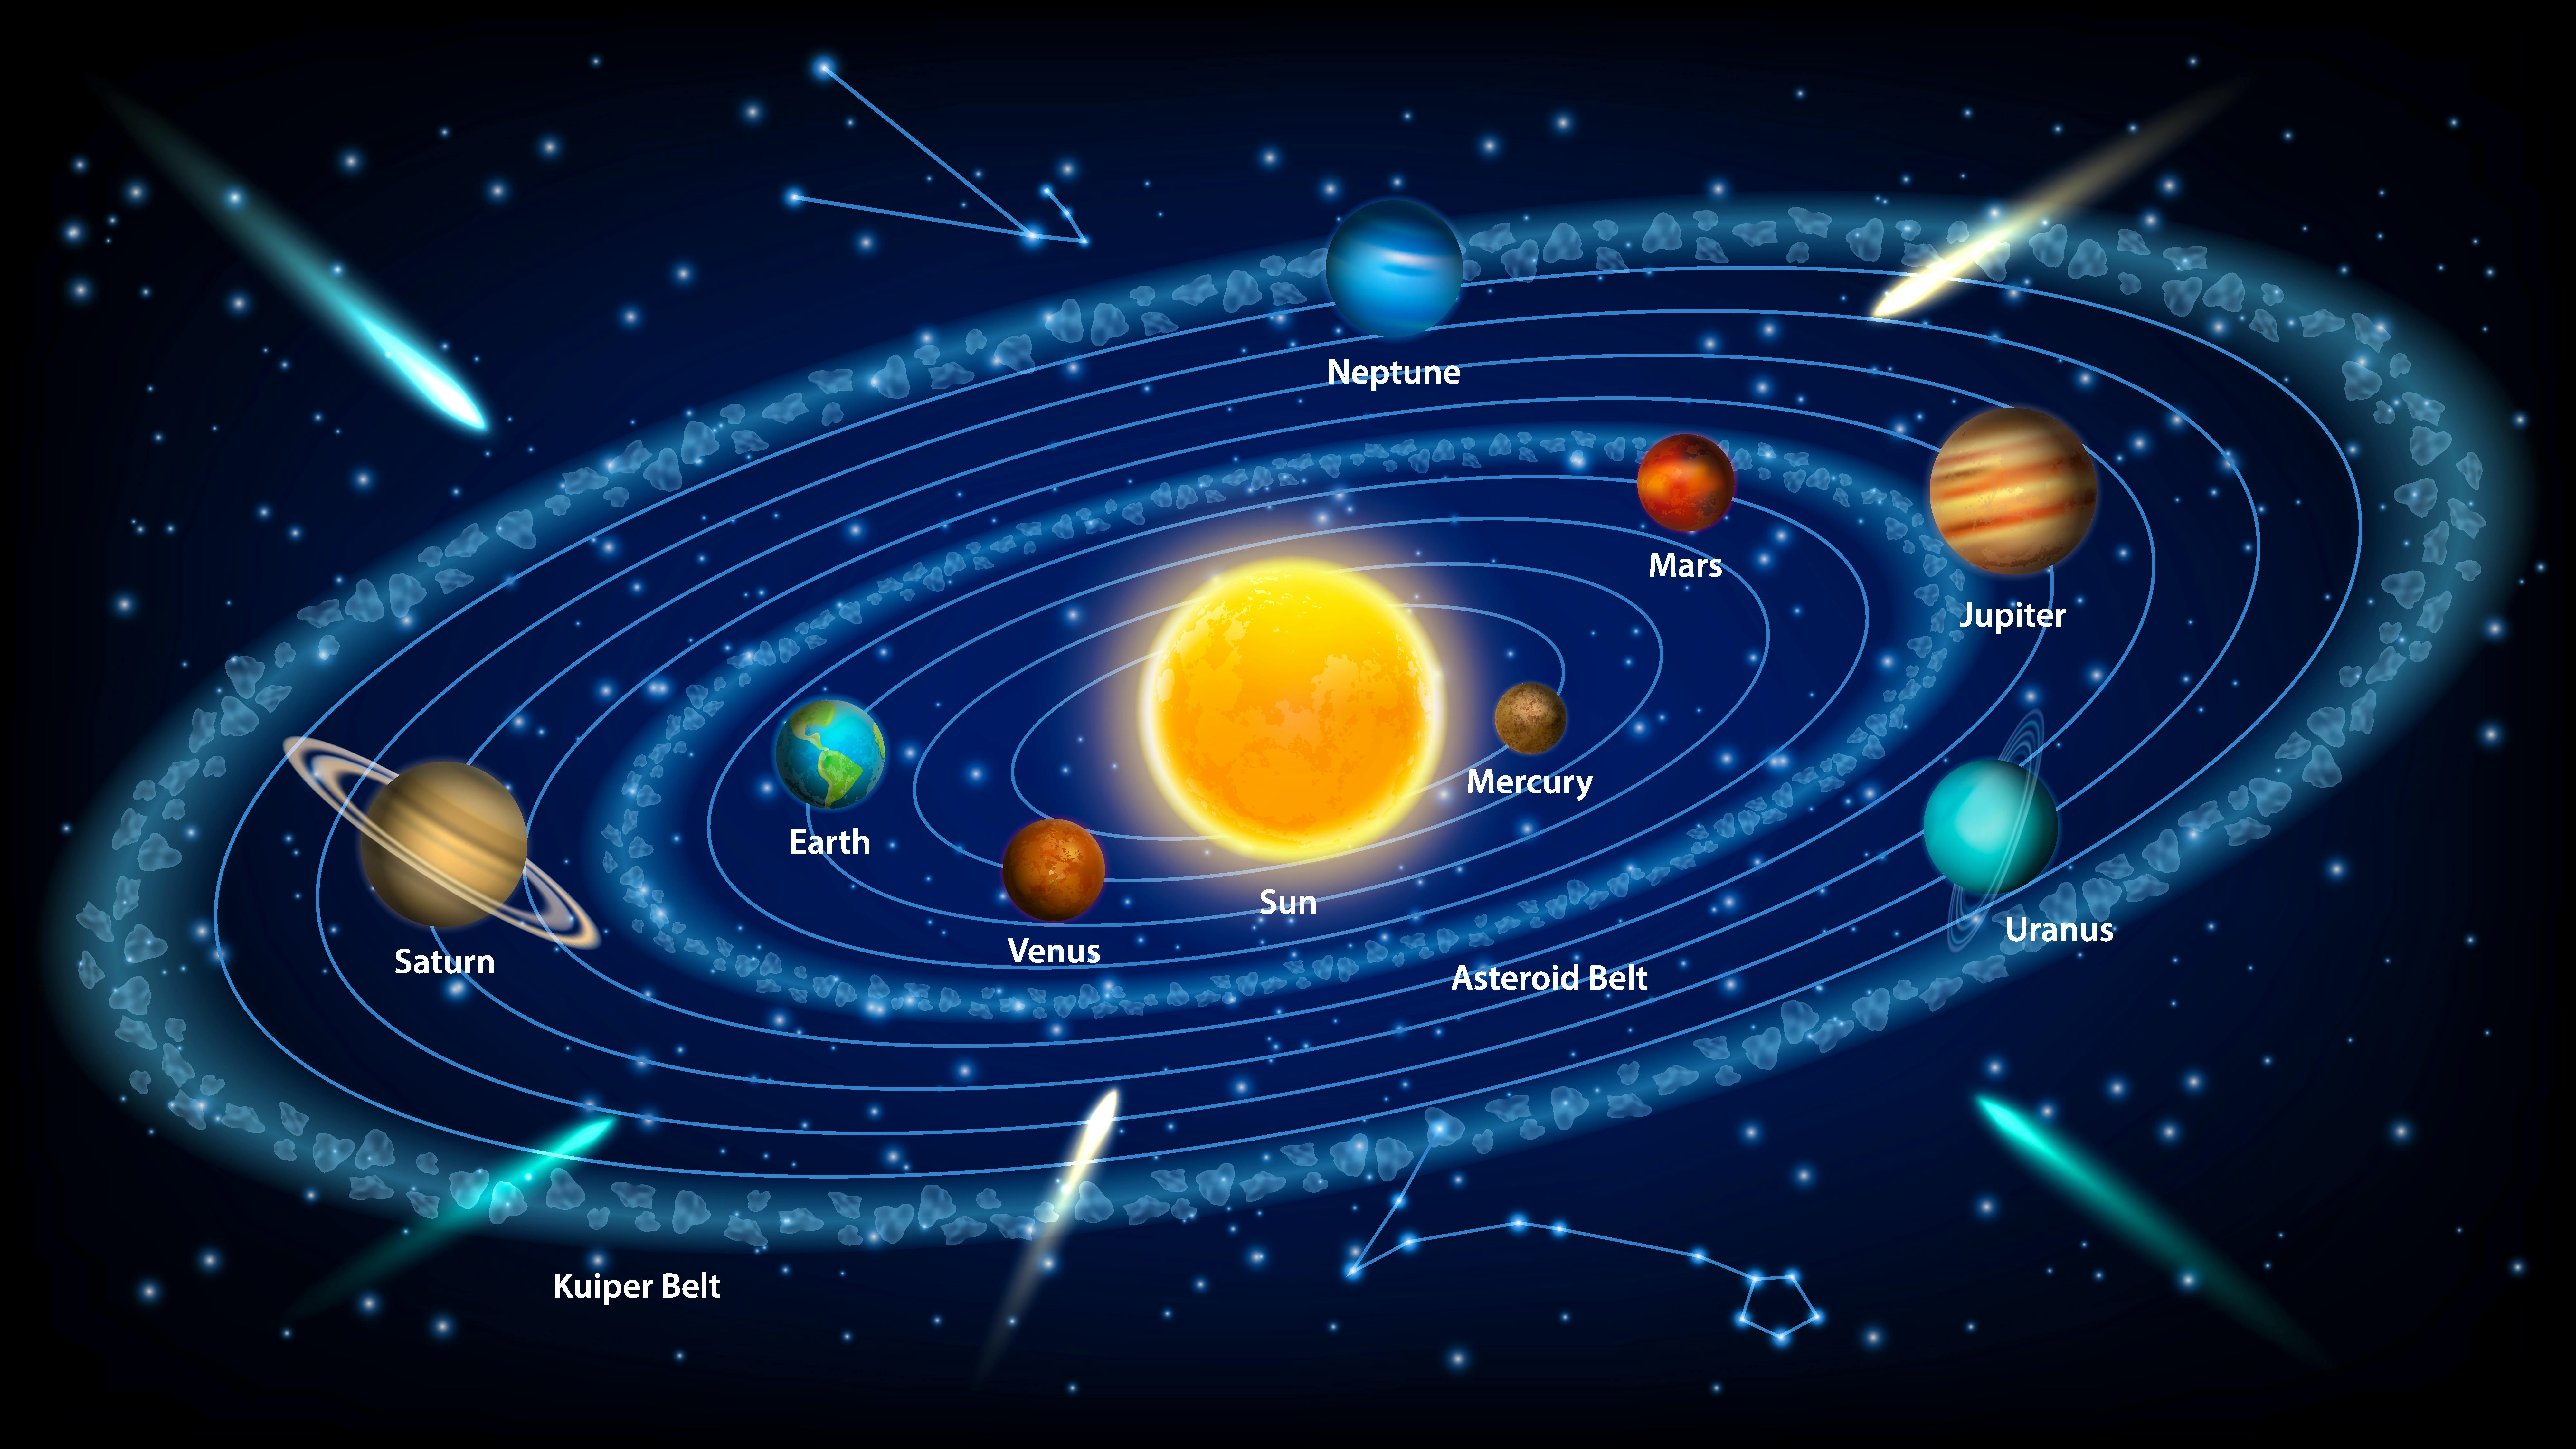 How big is the Solar System?